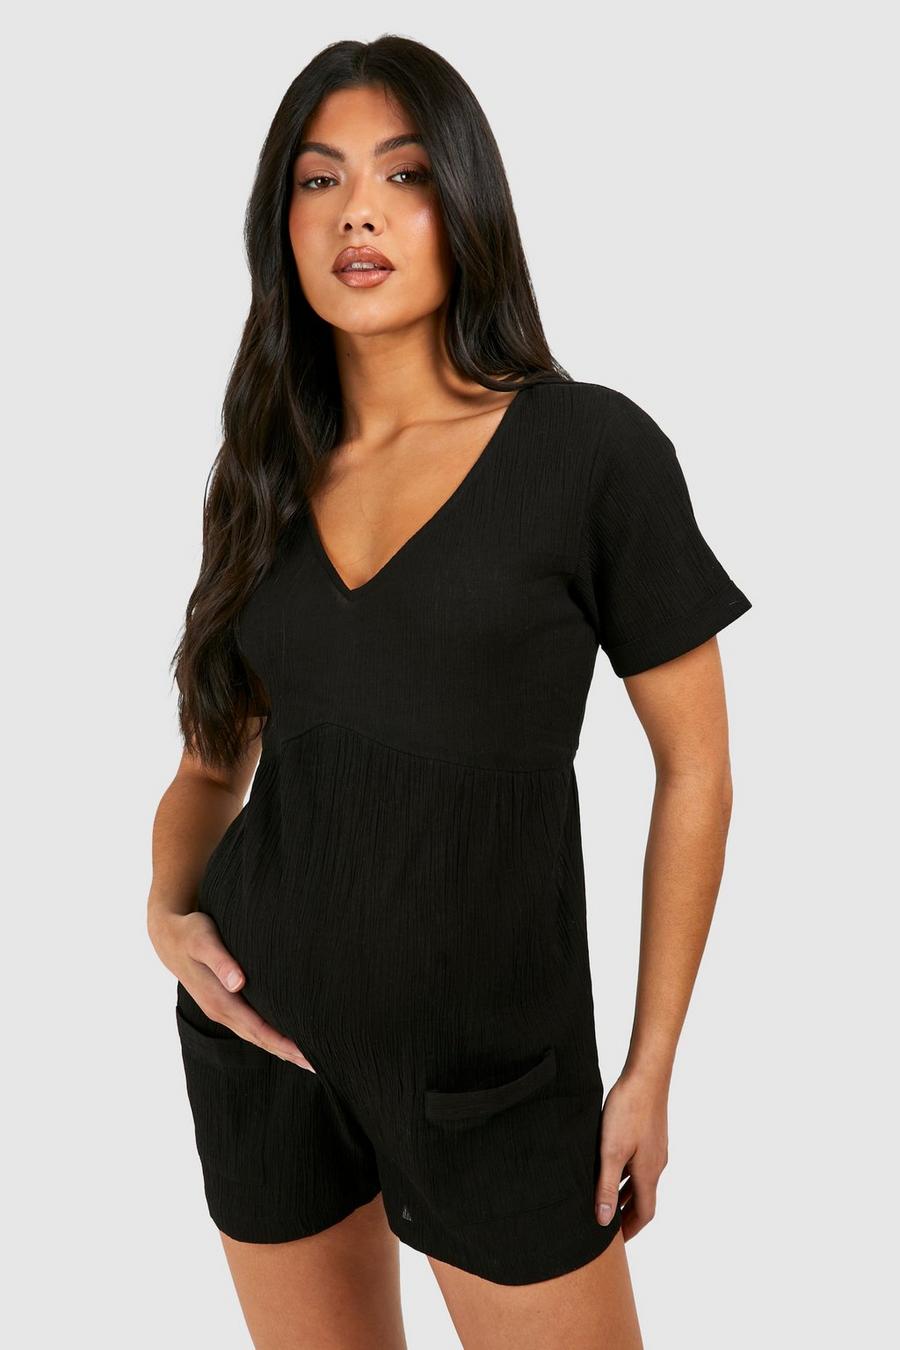 Black Maternity Cheesecloth Romper